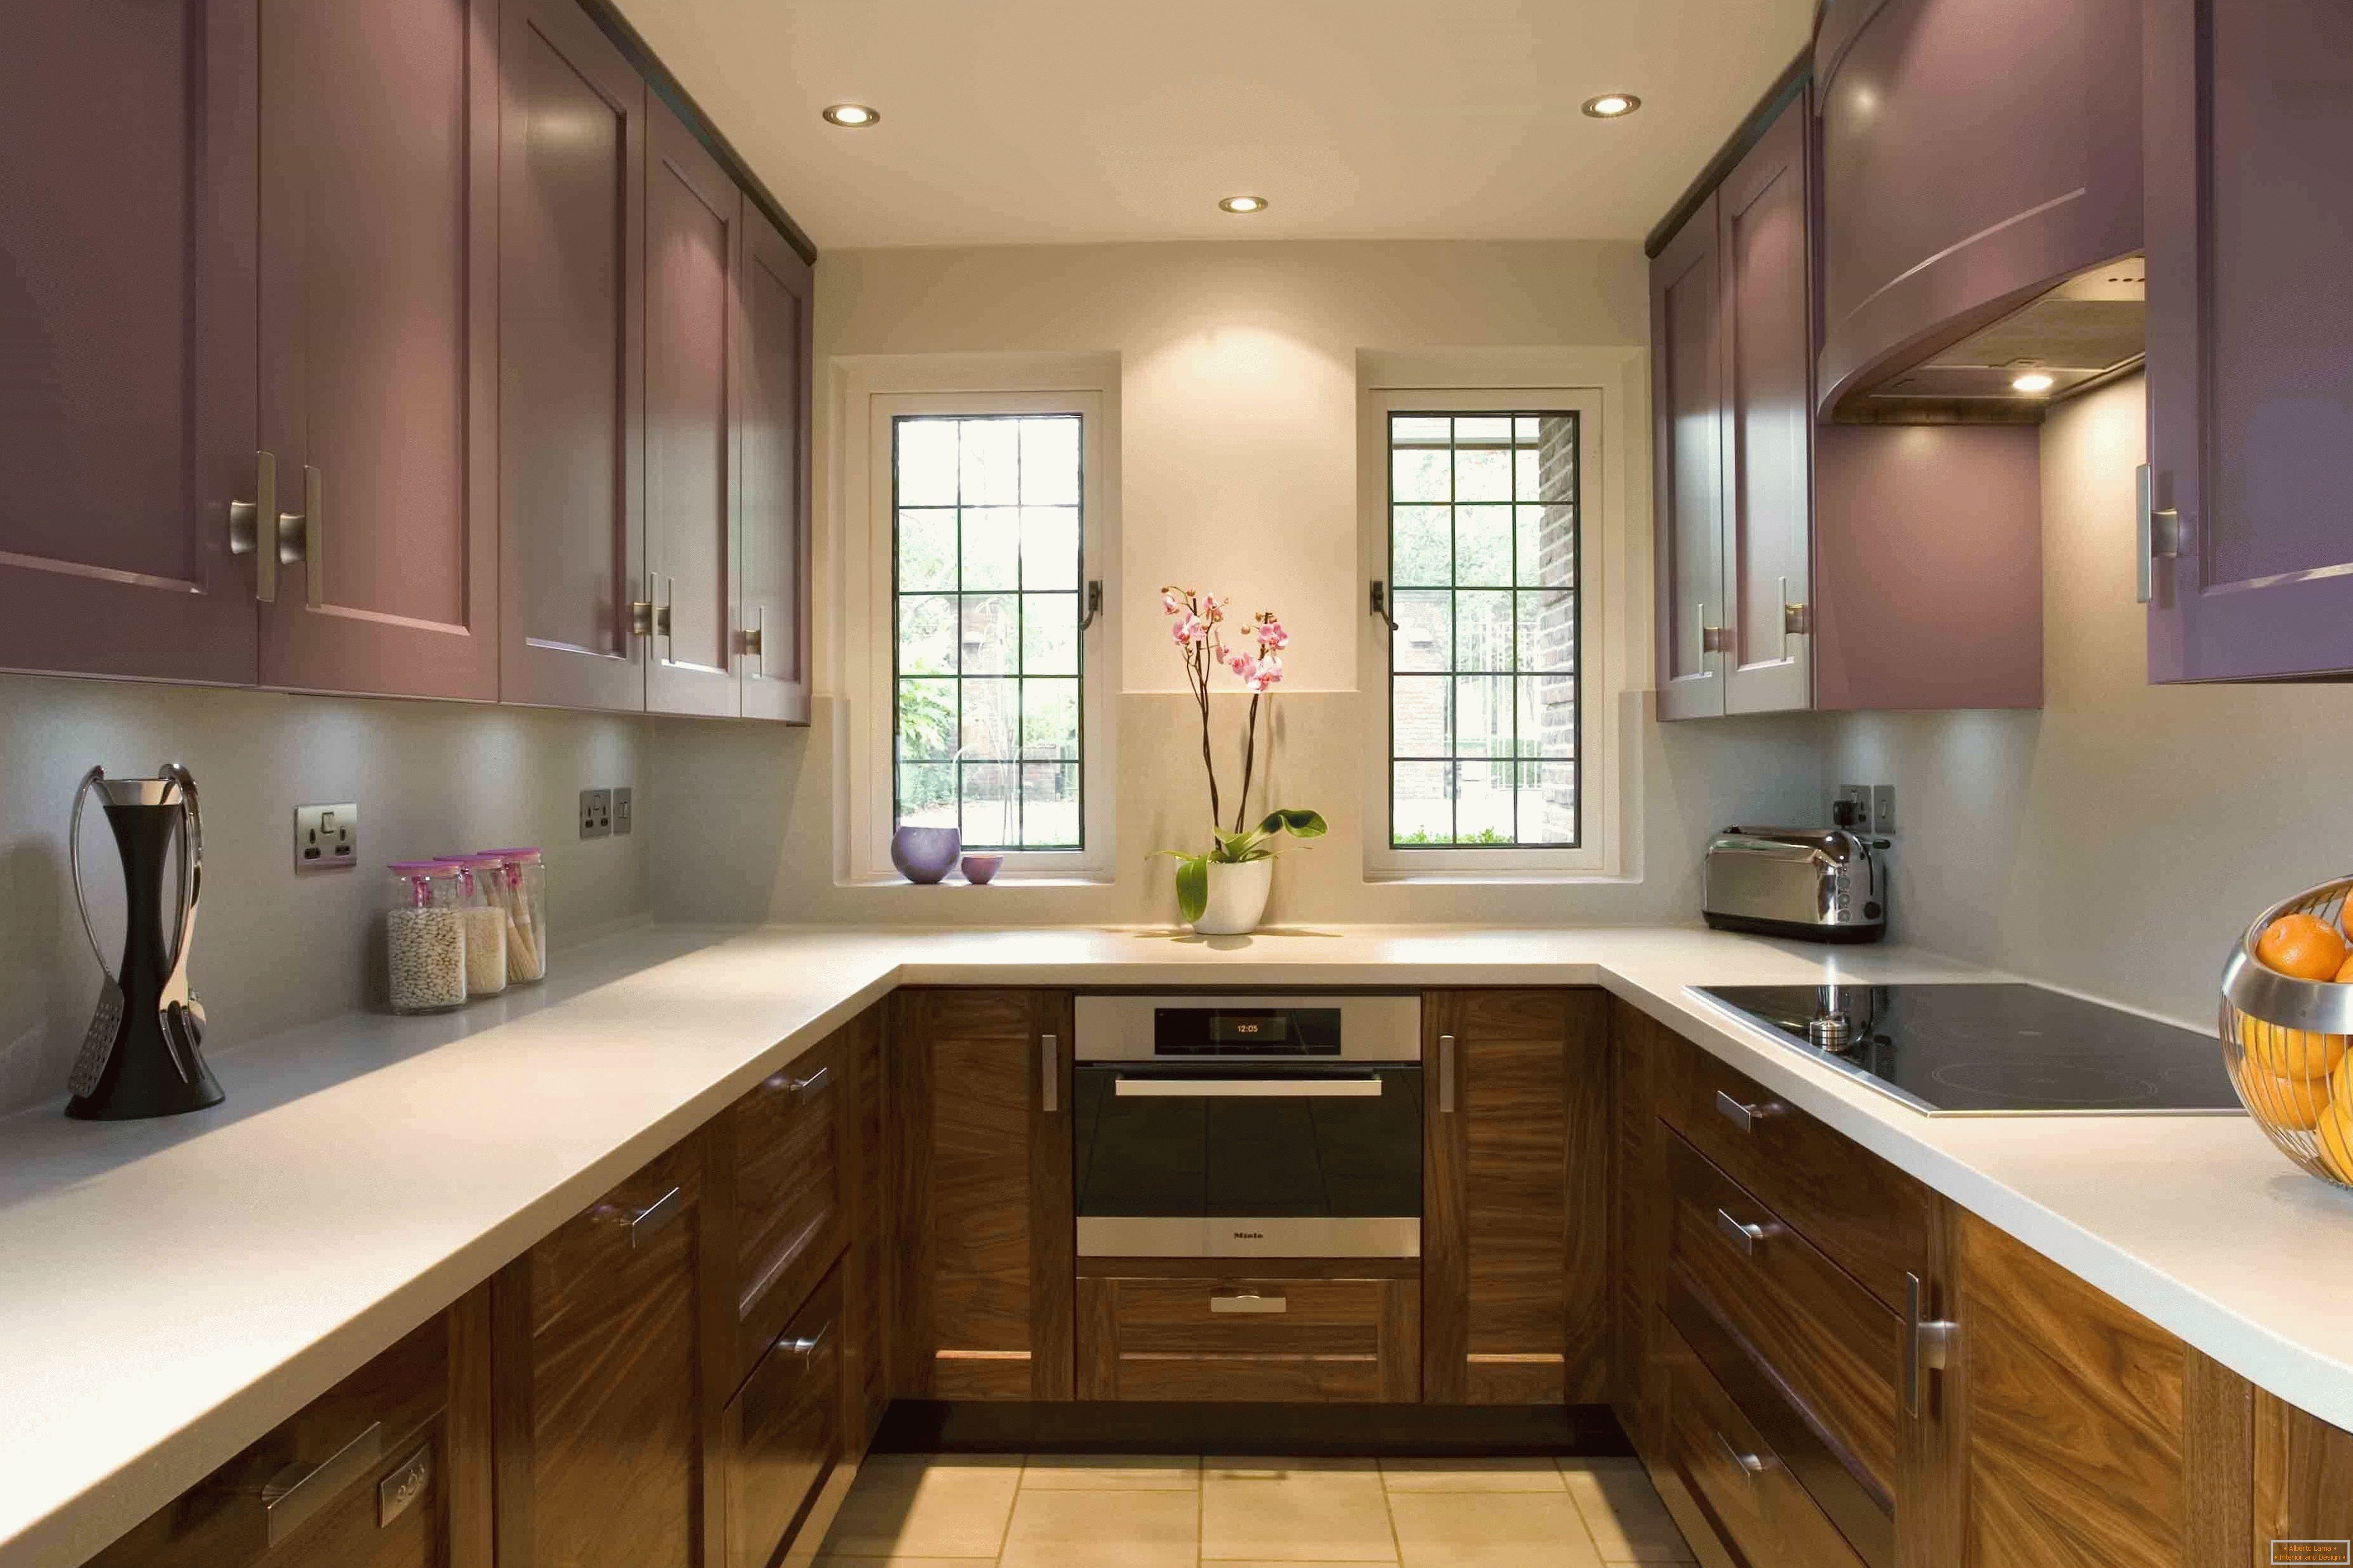 U-shaped kitchen in lilac in combination with wood